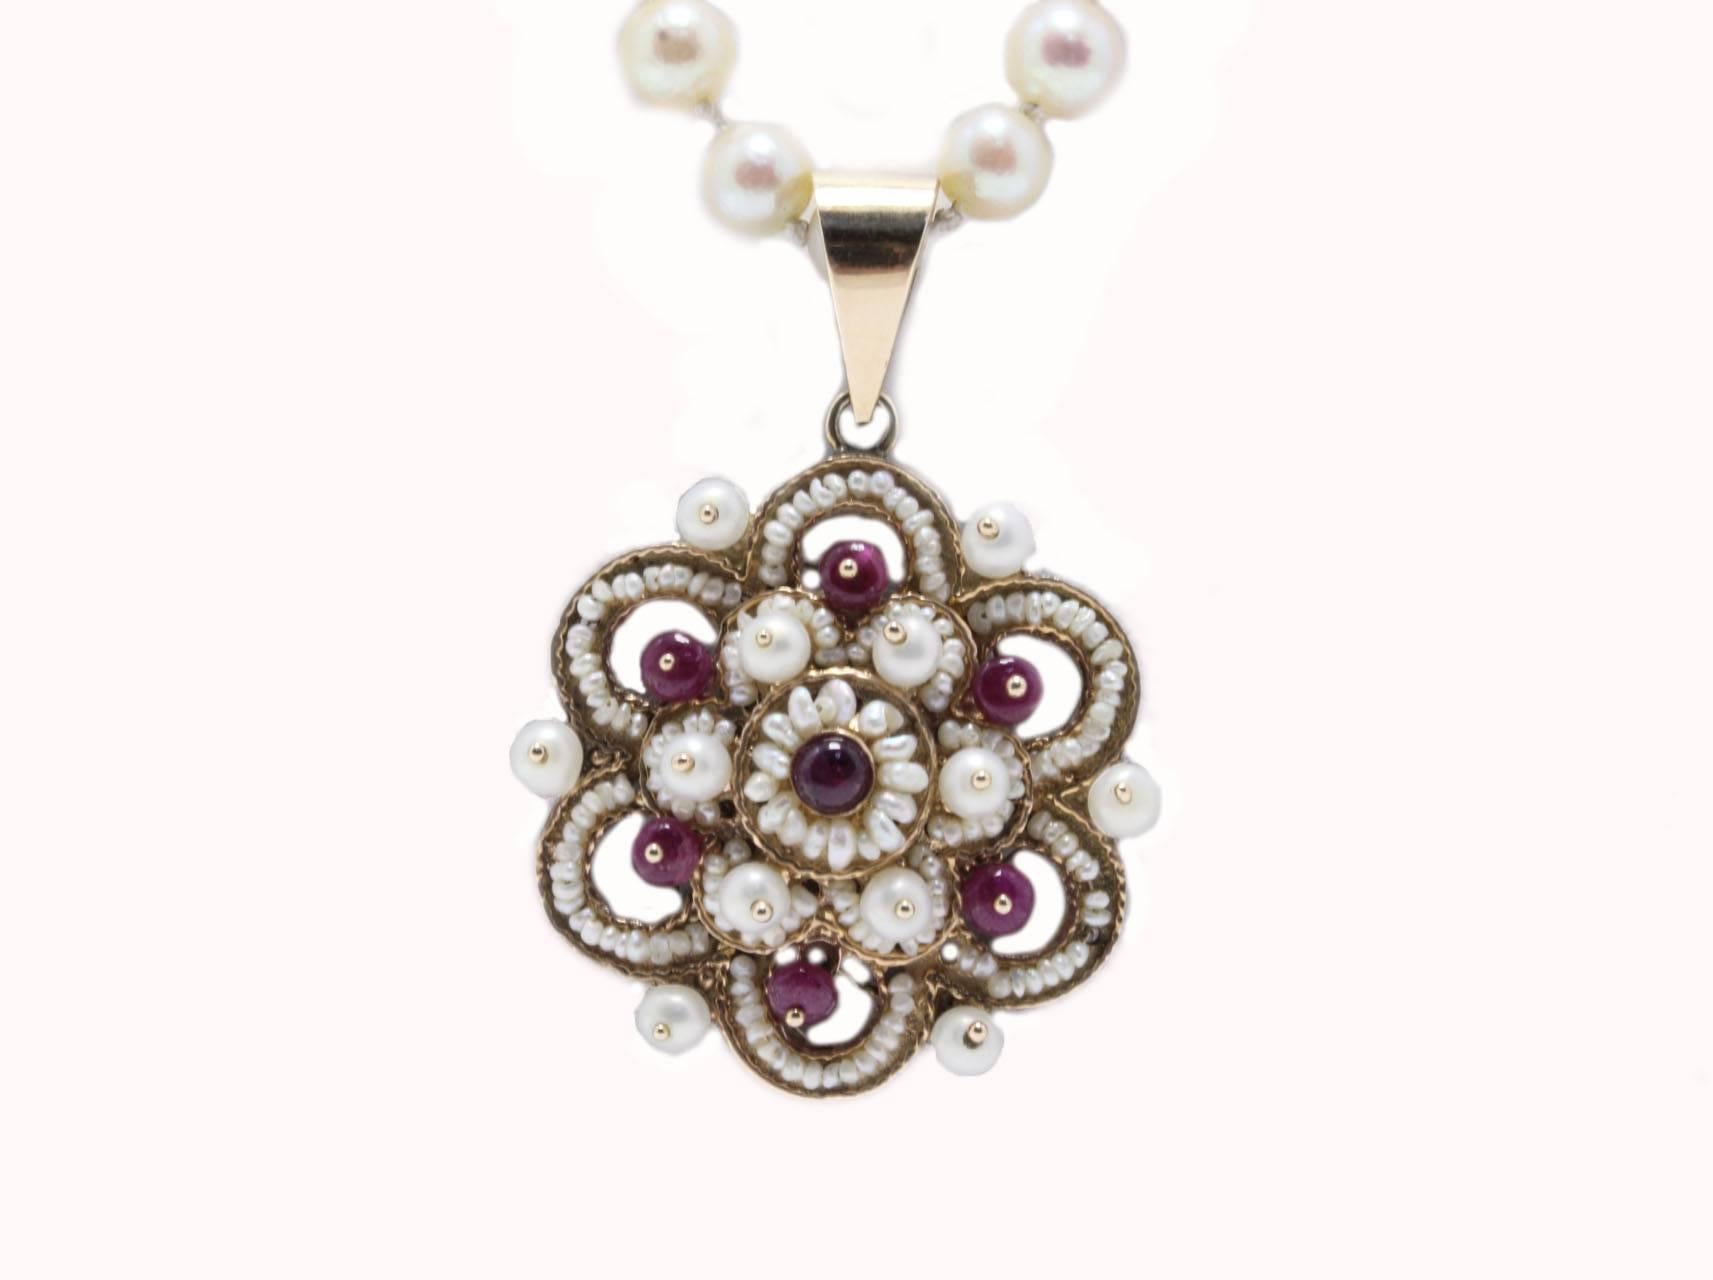 Charming beaded necklace composed of little pearls as strand and a pendant of little pearls and rubies bead. All is mounted in 14Kt rose gold and 14Kt white gold.
Tot weight 26.10 g

Rf. ggia